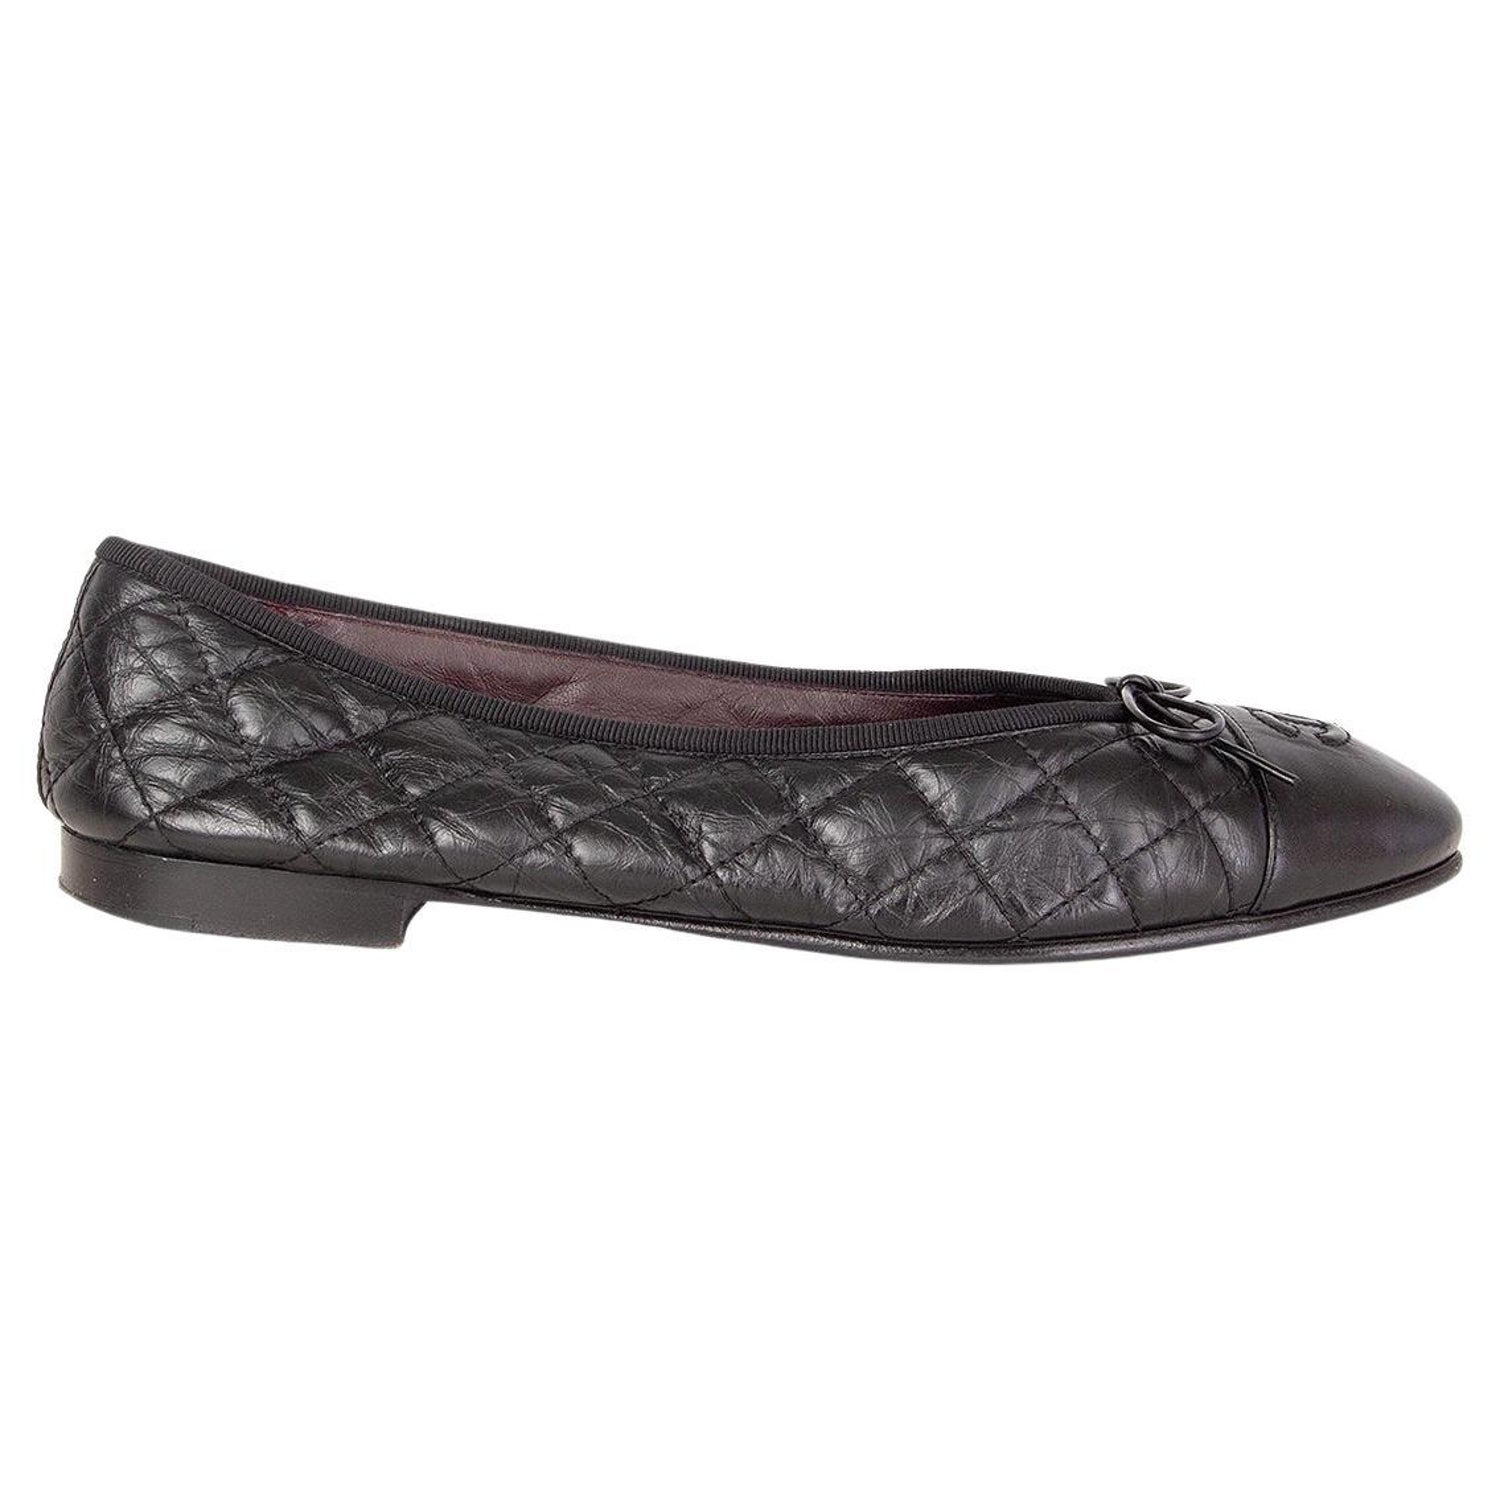 Sold at Auction: Chanel: a Pair of Black Satin Camellia Ballerina Flats  (includes dust bag)